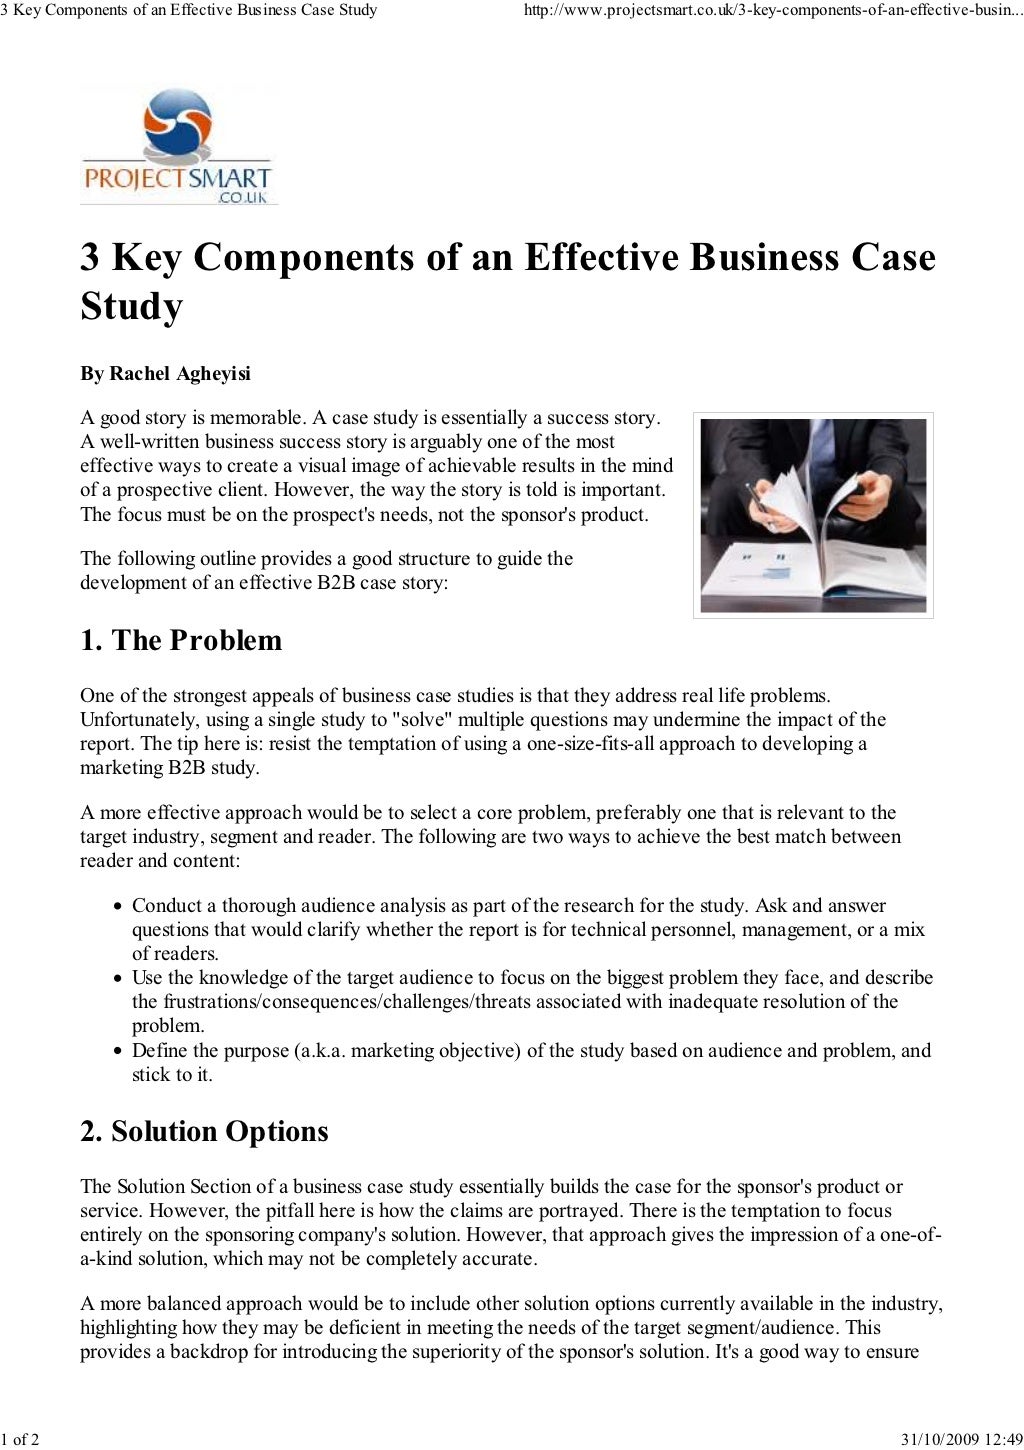 business functions case study